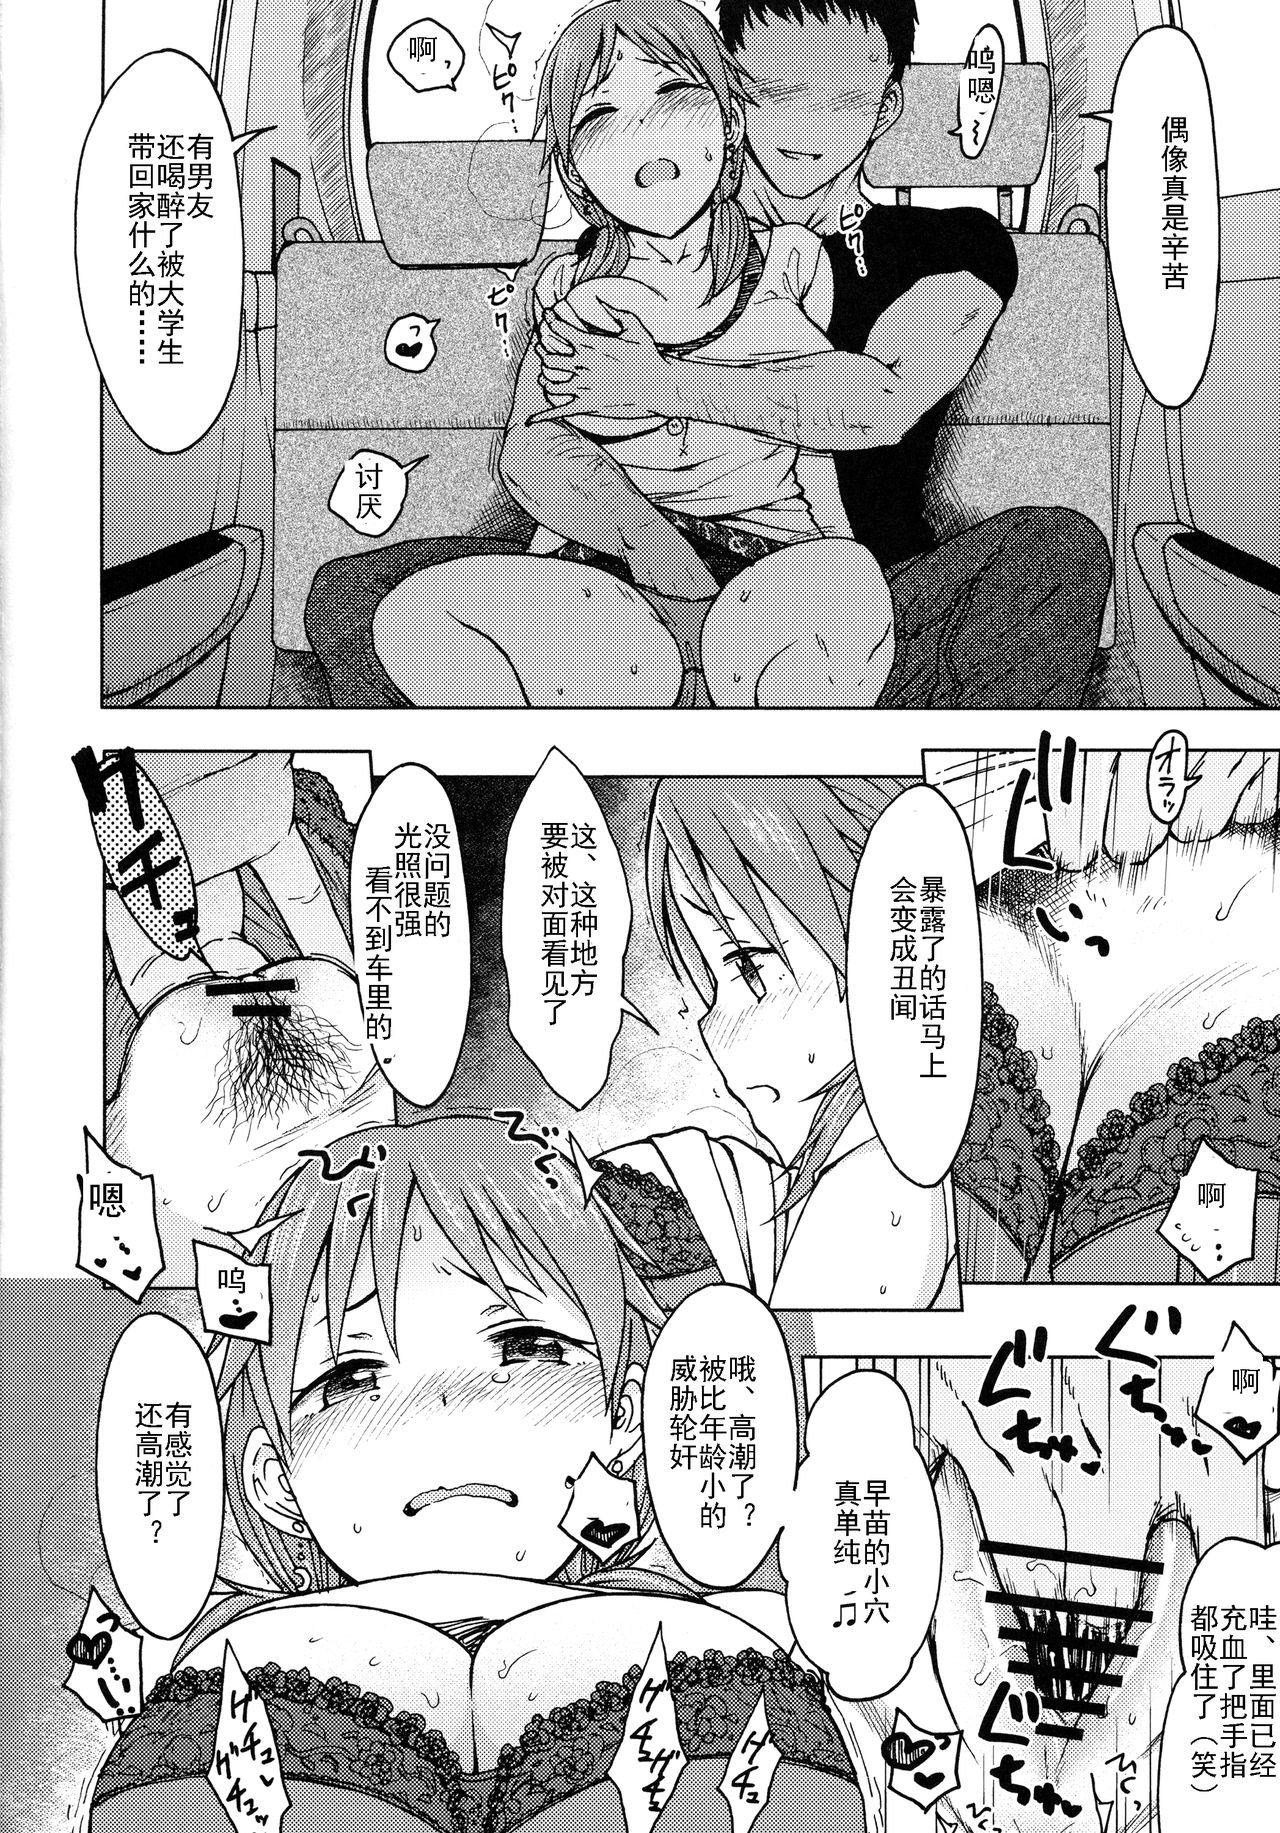 Pawg Paranoid Parade - The idolmaster Striptease - Page 4